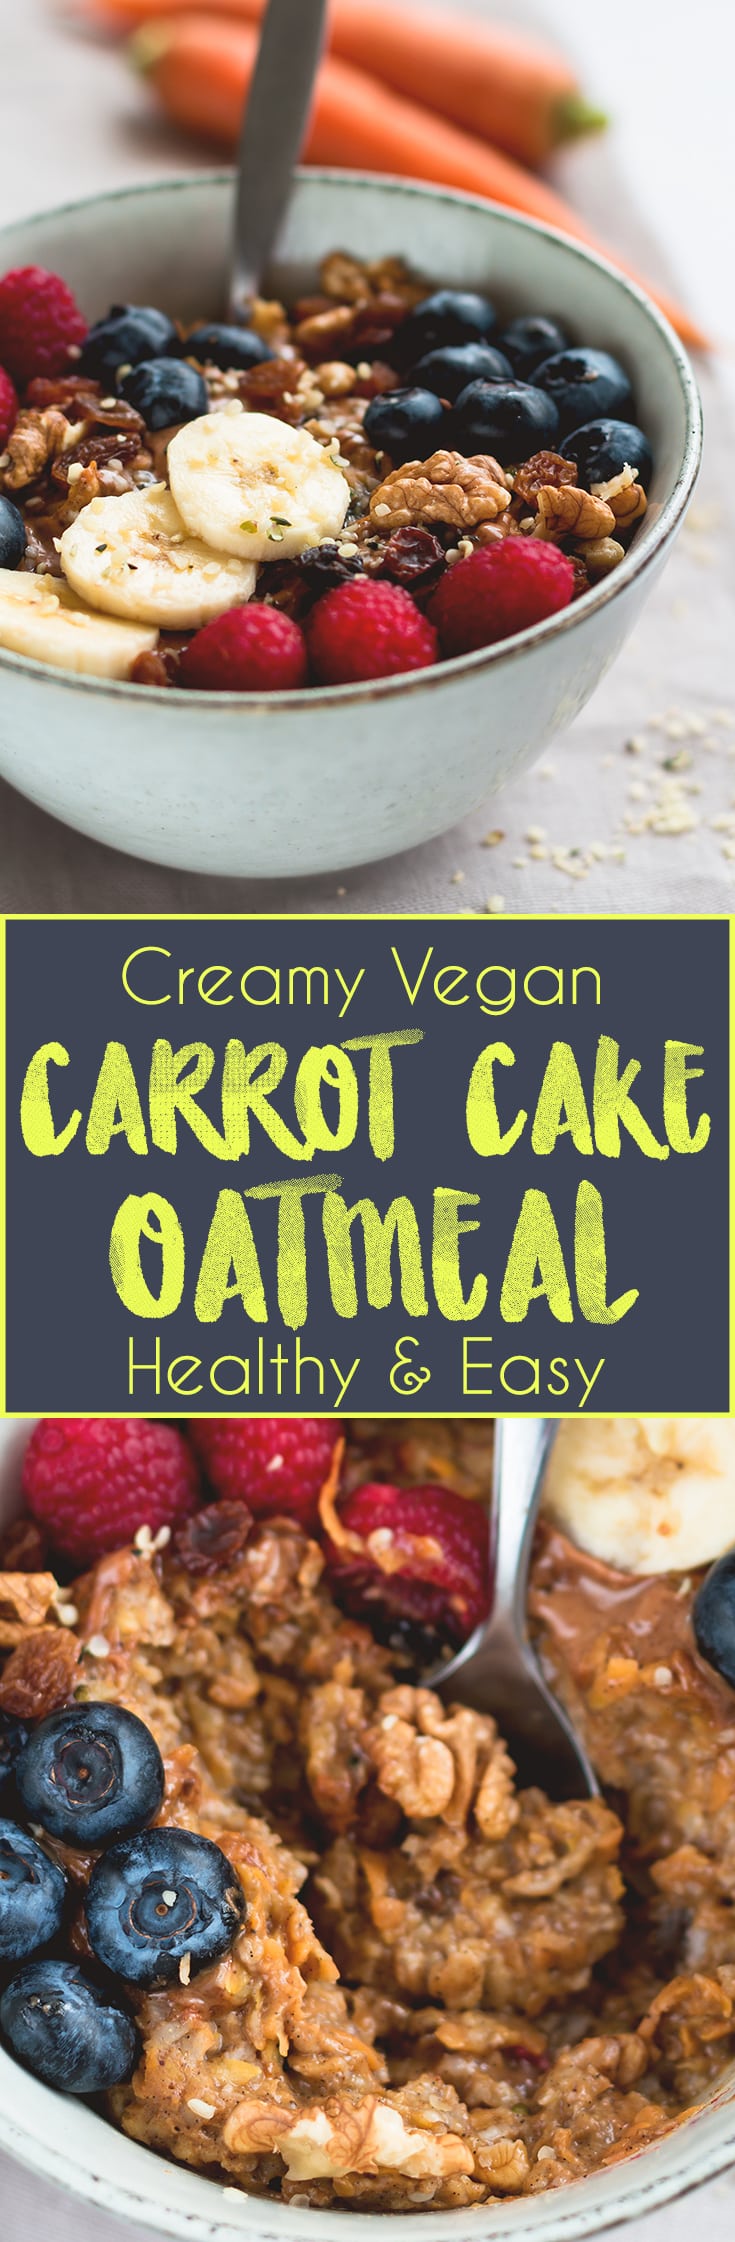 Creamy Vegan Carrot Cake Oatmeal - delicious zesty vegan bowl of awesomeness. I absolutely LOVE this recipe! It's easy, healthy, and really tasty! | thehealthfulideas.com